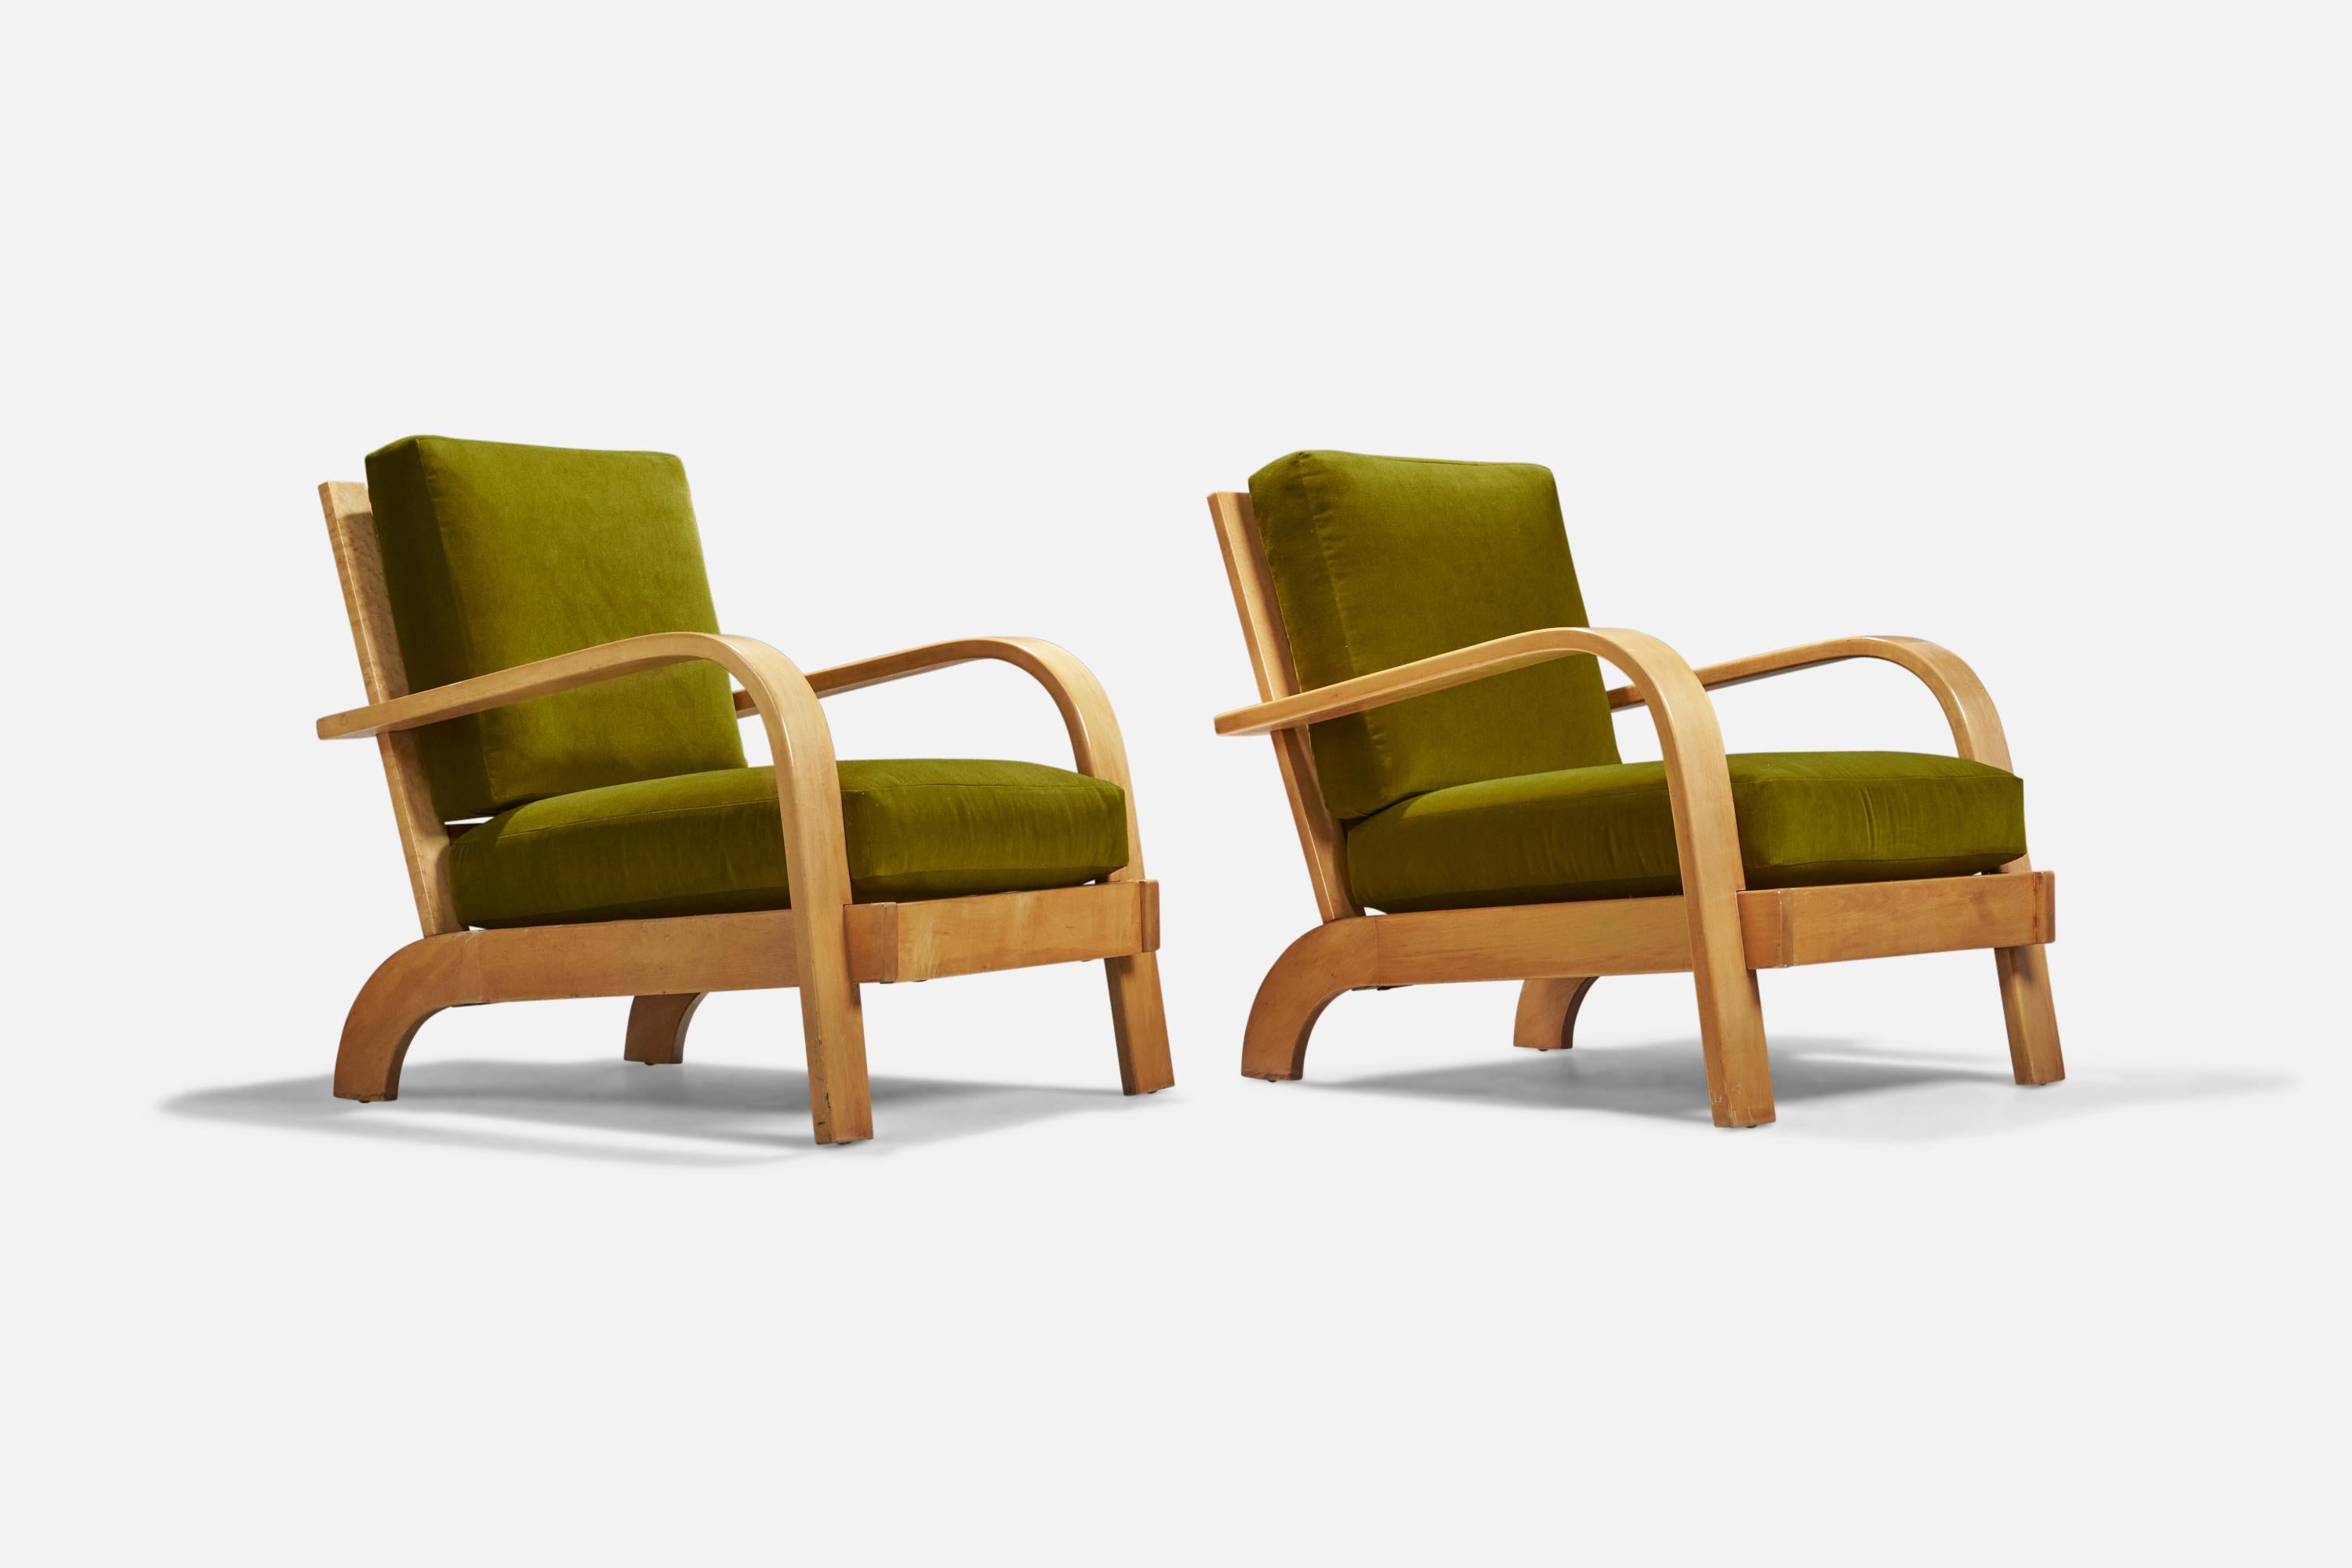 A pair of green velvet and maple lounge chairs designed by Russel Wright for Conant Ball, USA, c. 1936.